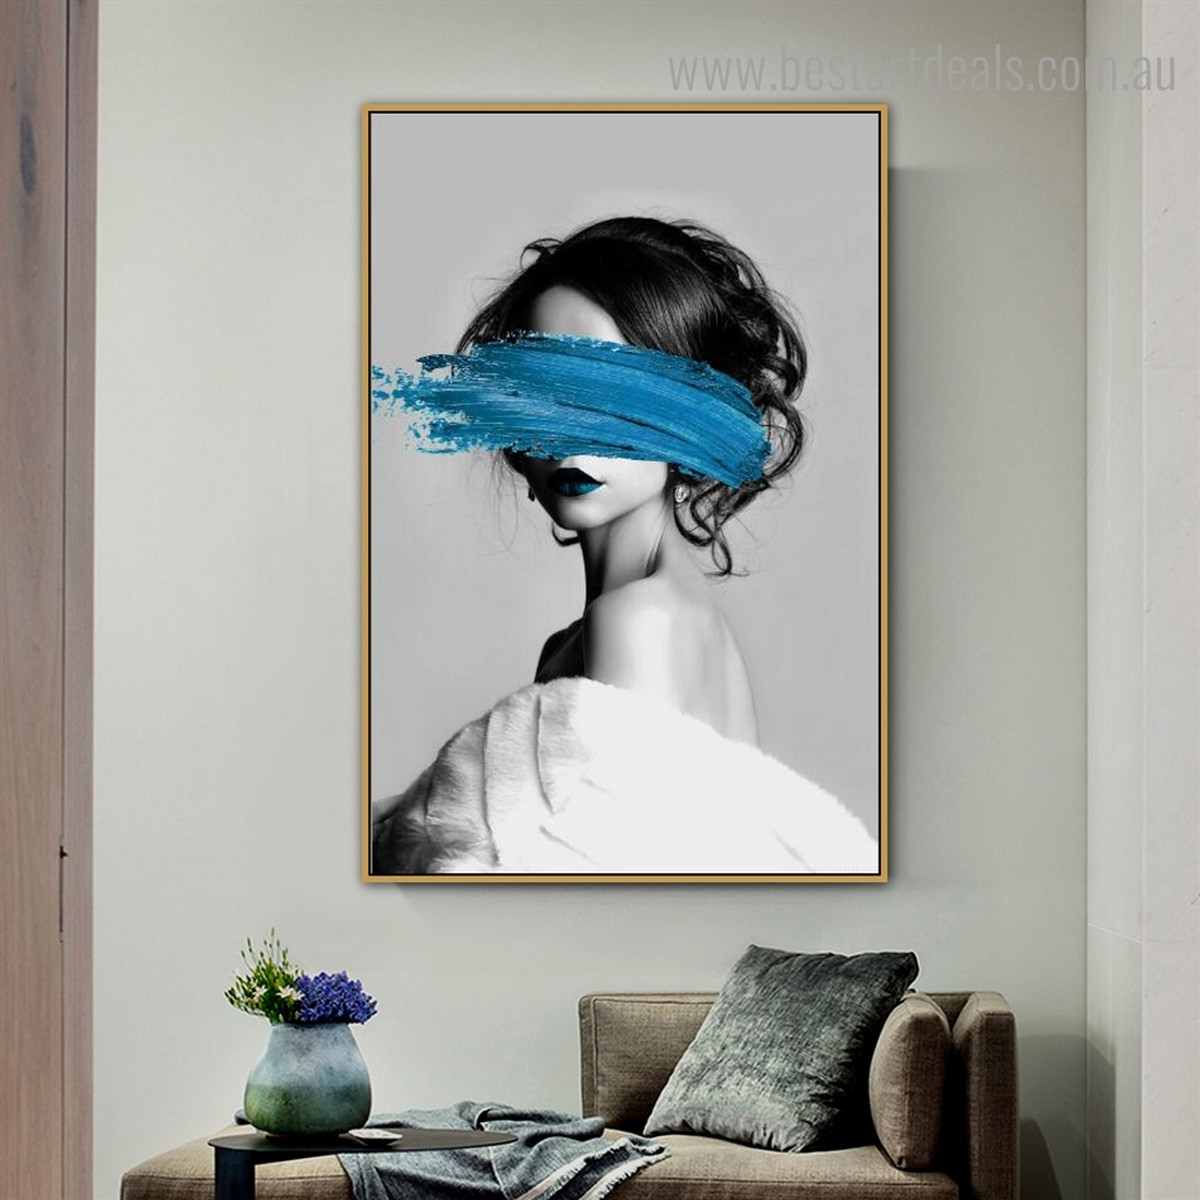 Blue Paint Face Abstract Fashion Modern Framed Artwork Pic Canvas Print for Room Wall Assortment